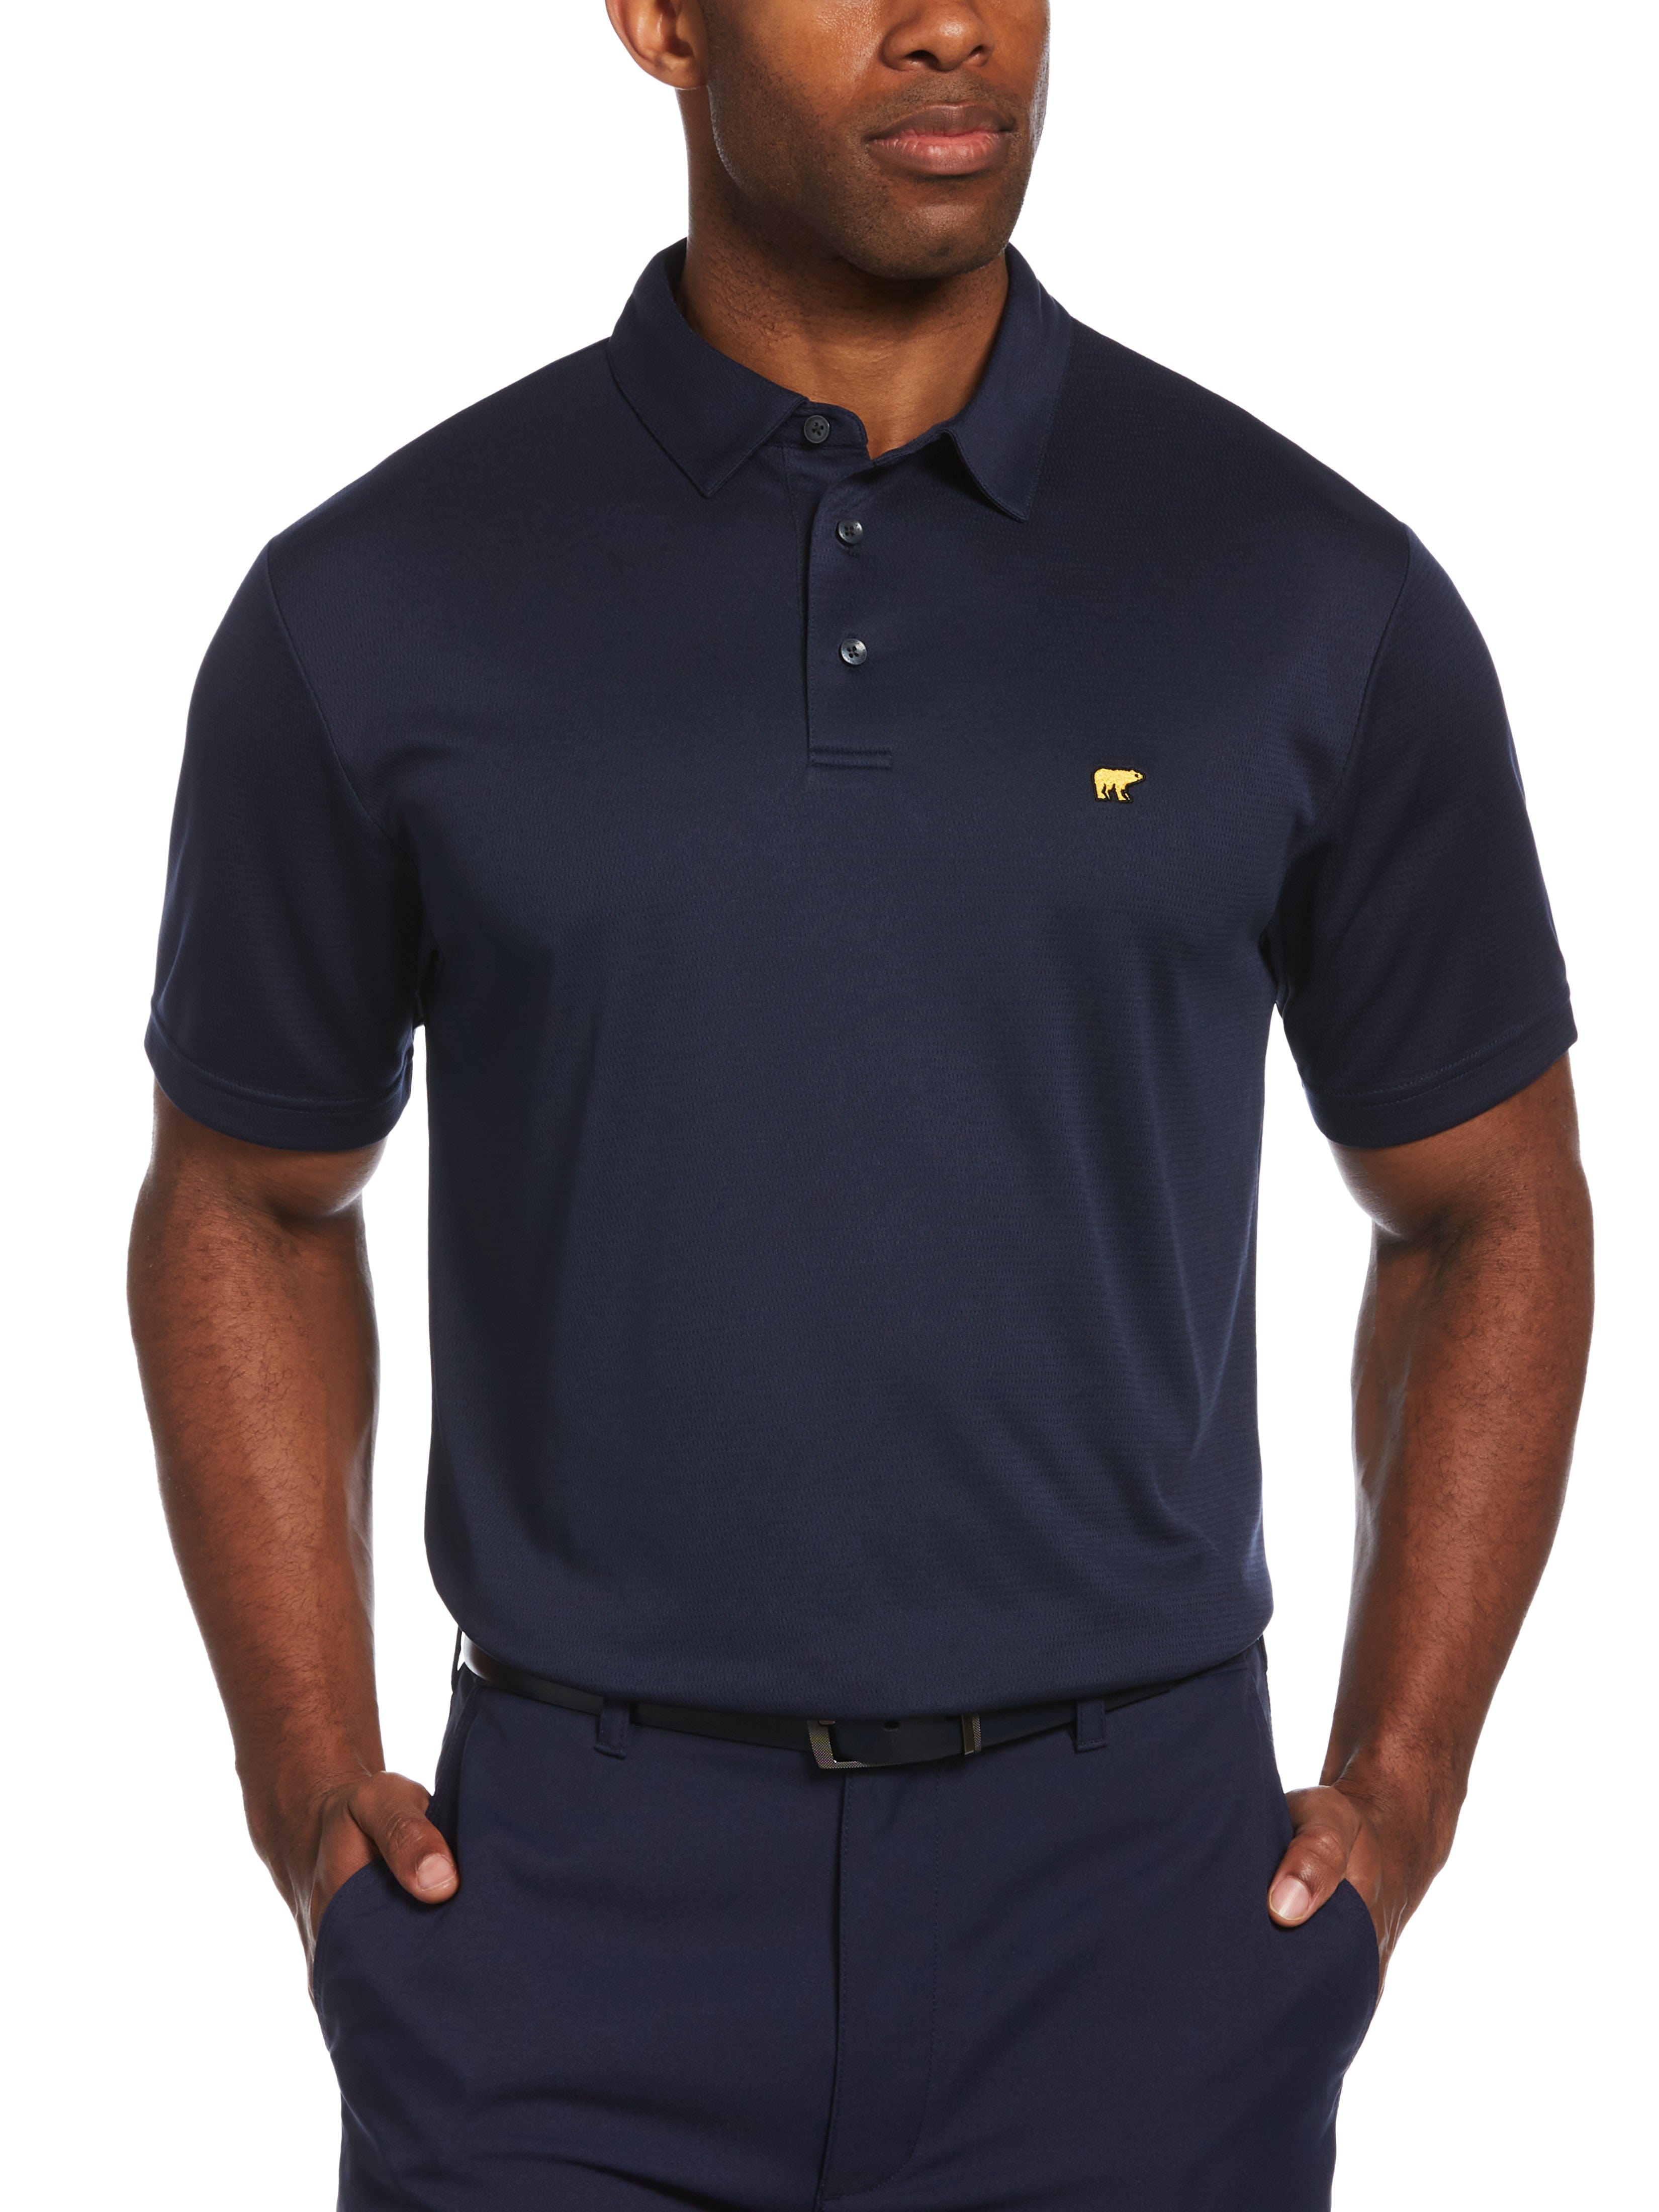 Jack Nicklaus Mens Solid Textured Golf Polo Shirt, Size XL, Classic Navy Blue, 100% Polyester | Golf Apparel Shop